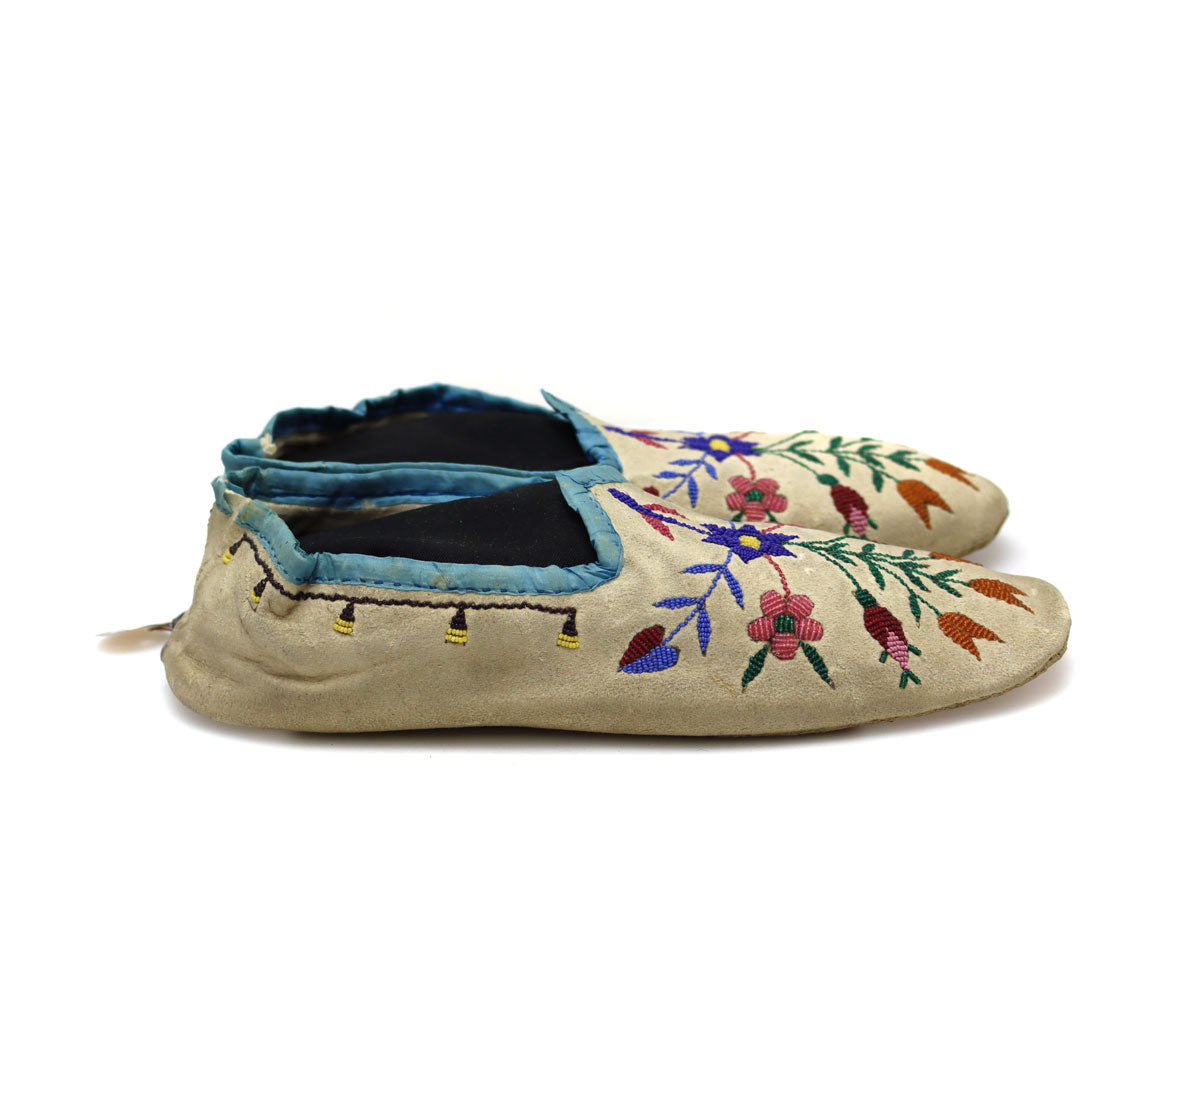 Chippewa Leather Beaded Moccasins with Floral Design c. 1880s, 2.25" x 10" x 14" (DW92323A-0421-016) 4
